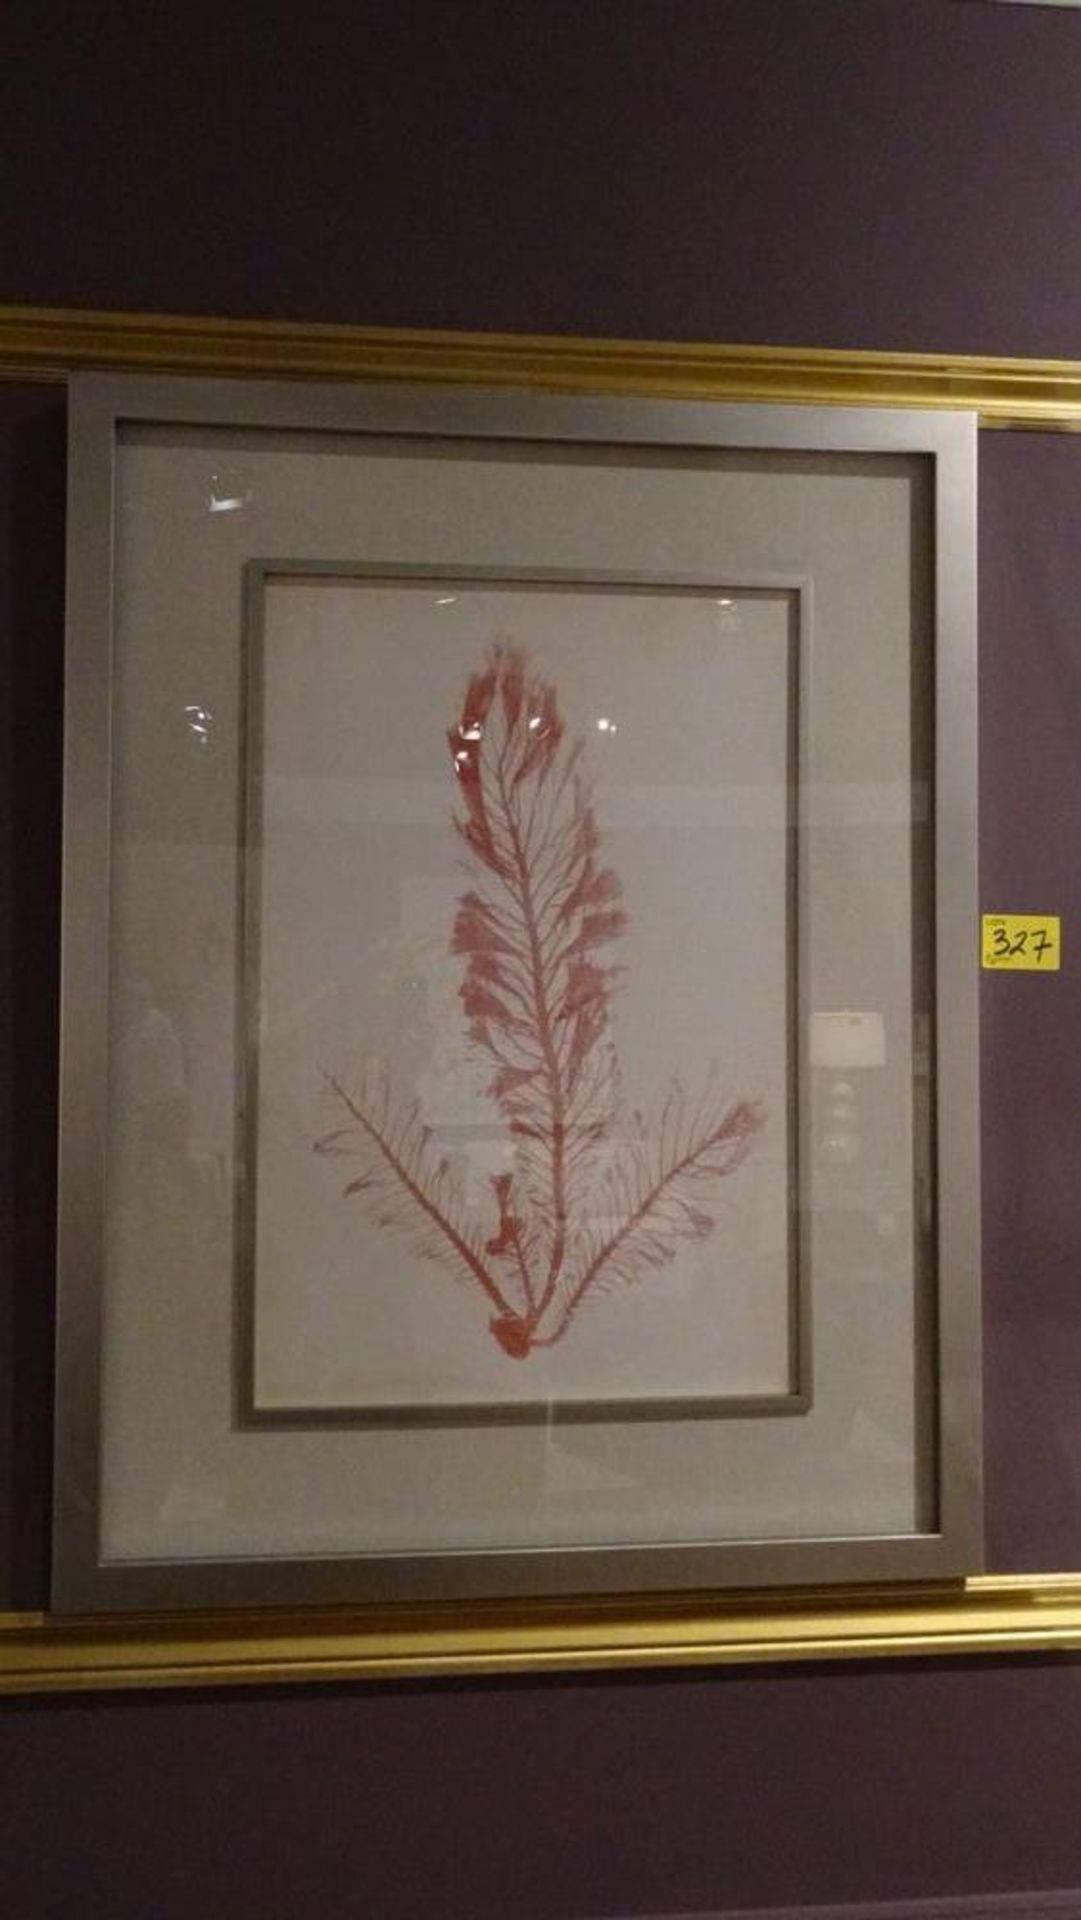 GRACE FEYOCK - FRAMED PRINT, LINEN INLAY - Image 2 of 2